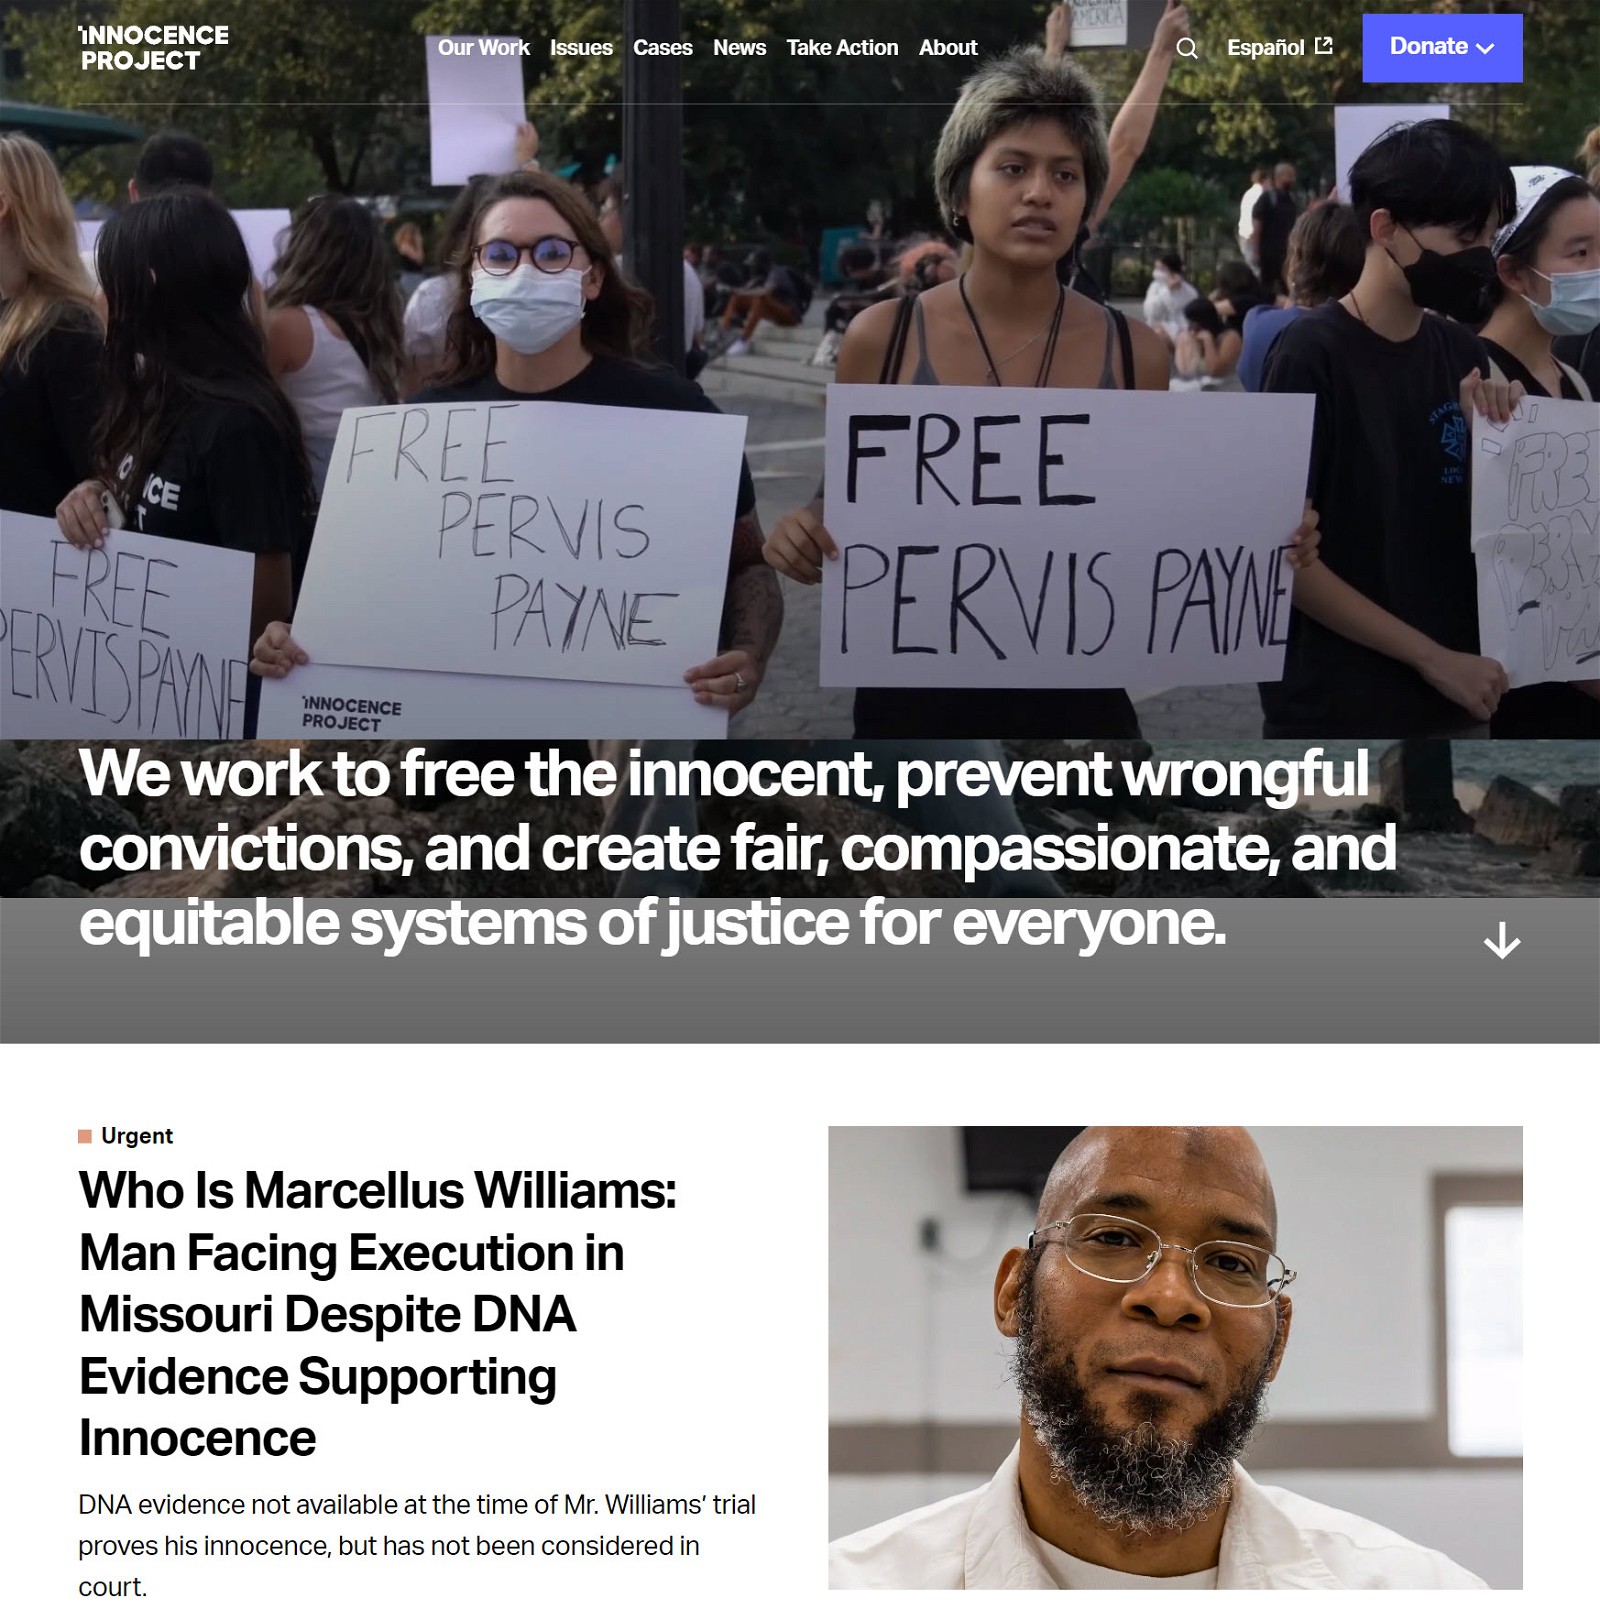 The Innocence Project homepage